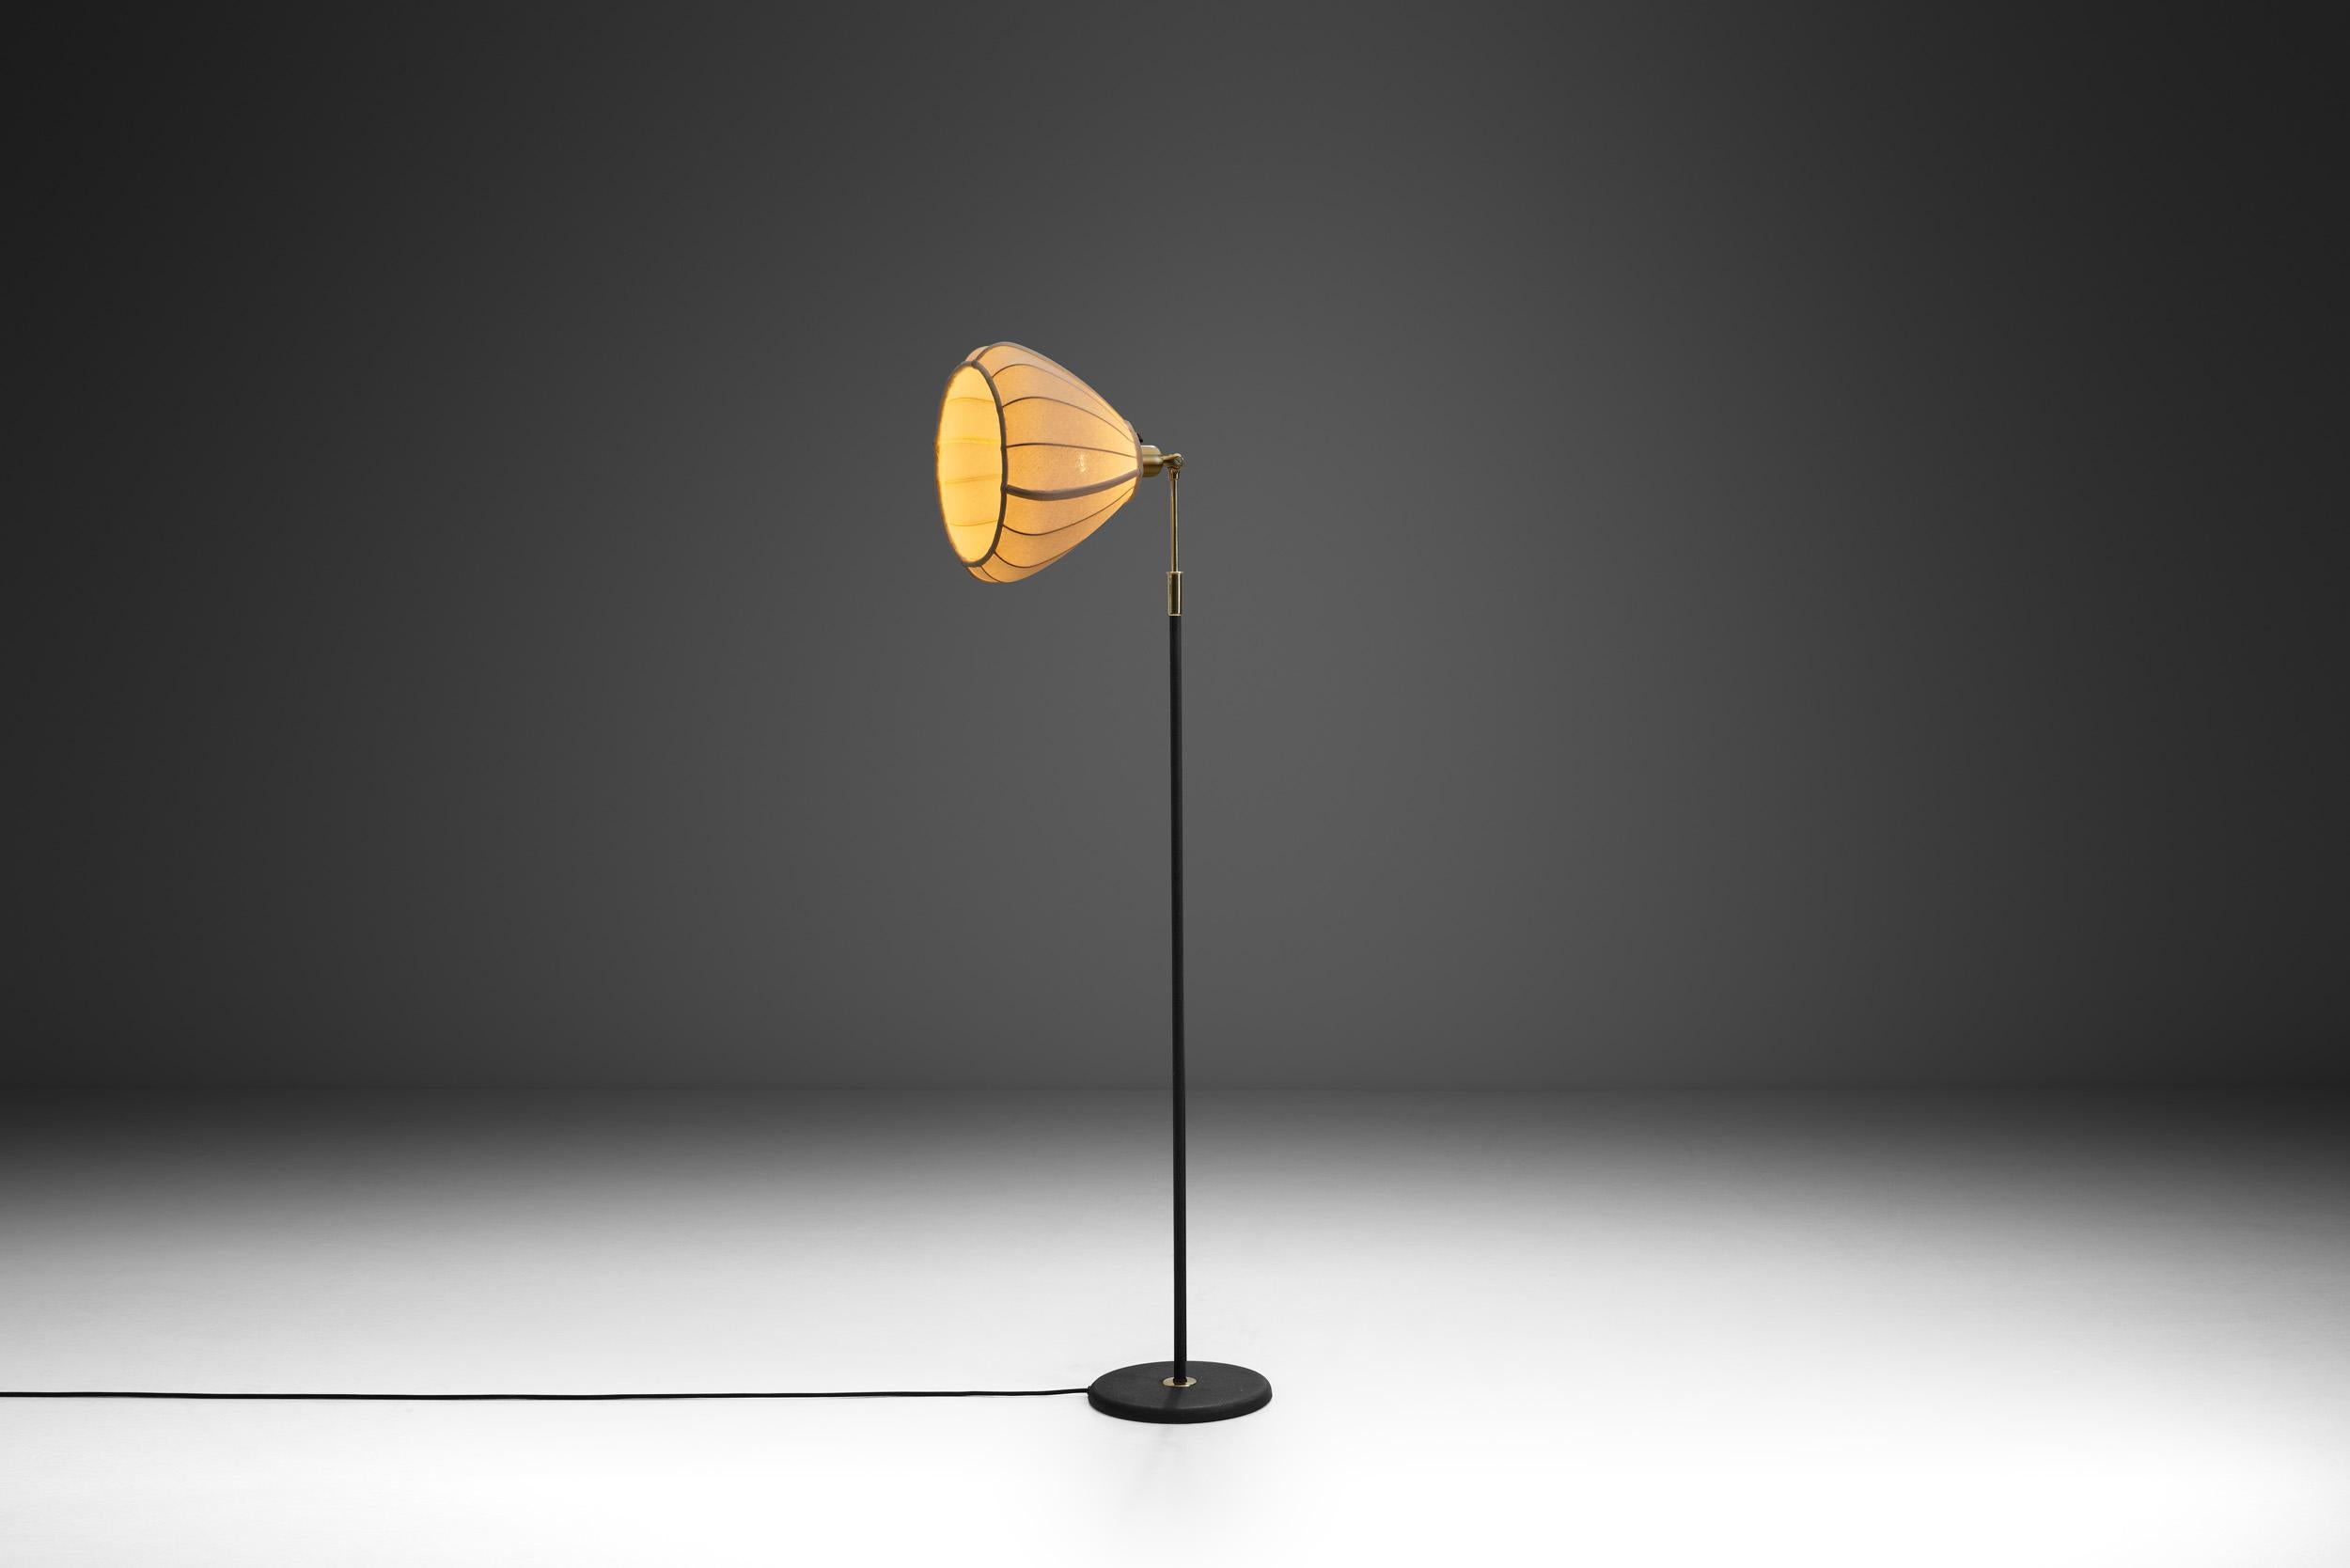 ‎‎‎‎This exceptionally rare floor lamp model is delightfully distinctive, and while it carries the essential Swedish design elements and ideals, it is unique in all sense of the word.

This model B7216 floor lamp's organic fabric shade is